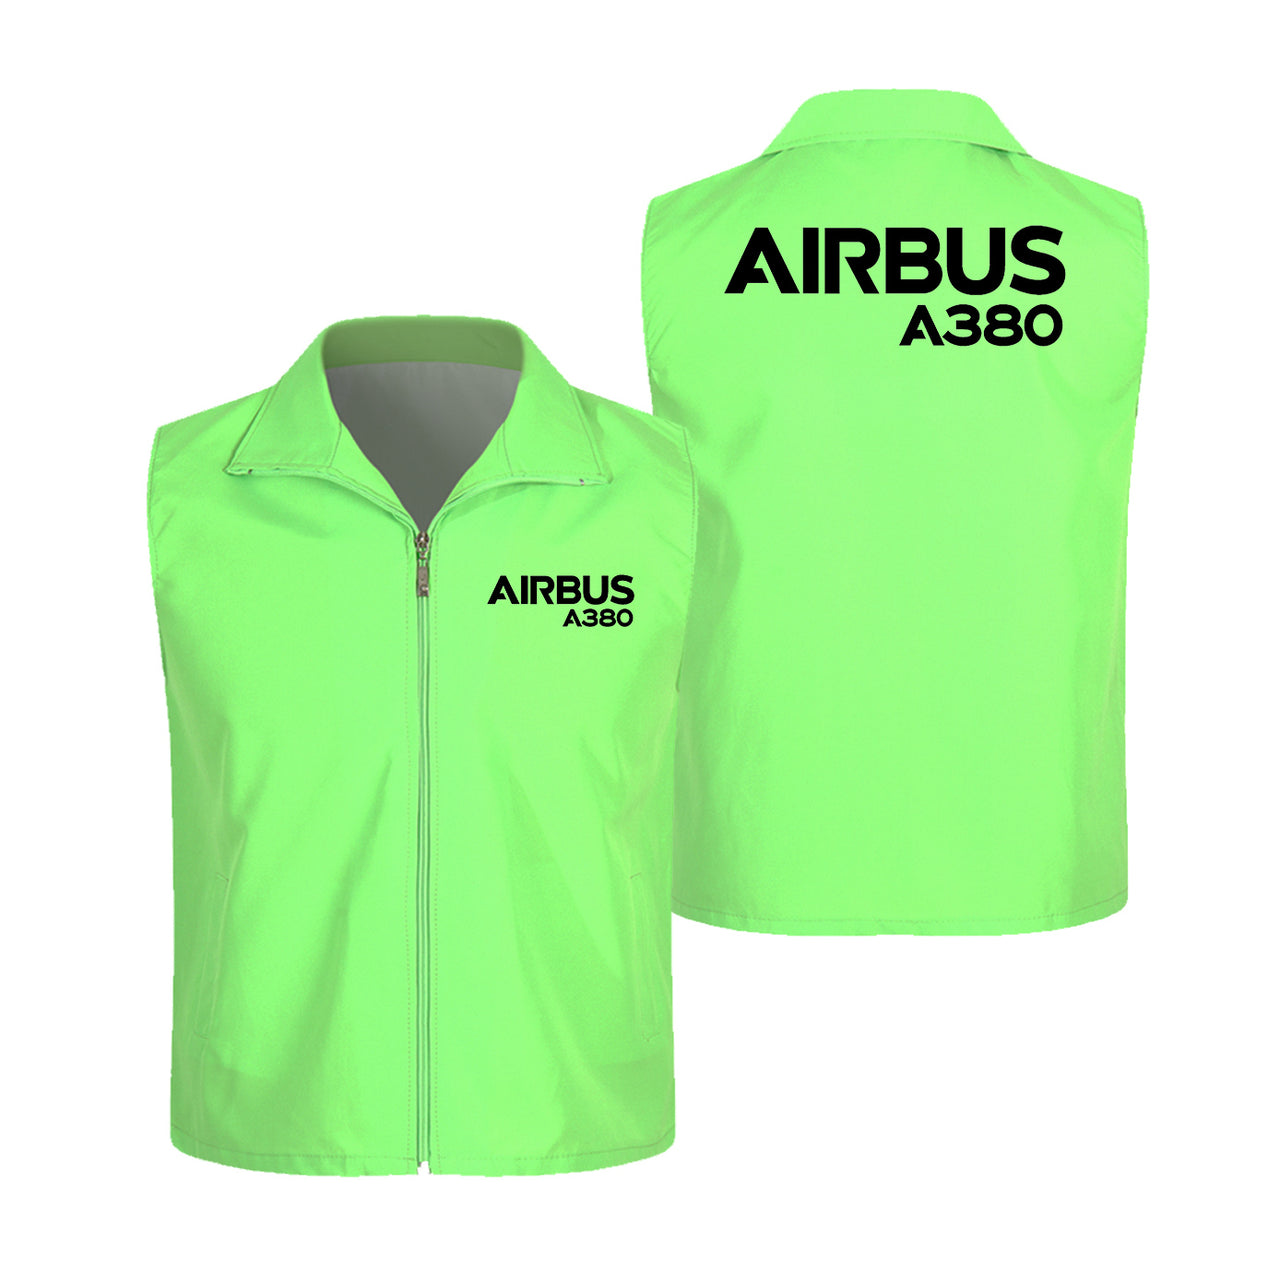 Airbus A380 & Text Designed Thin Style Vests